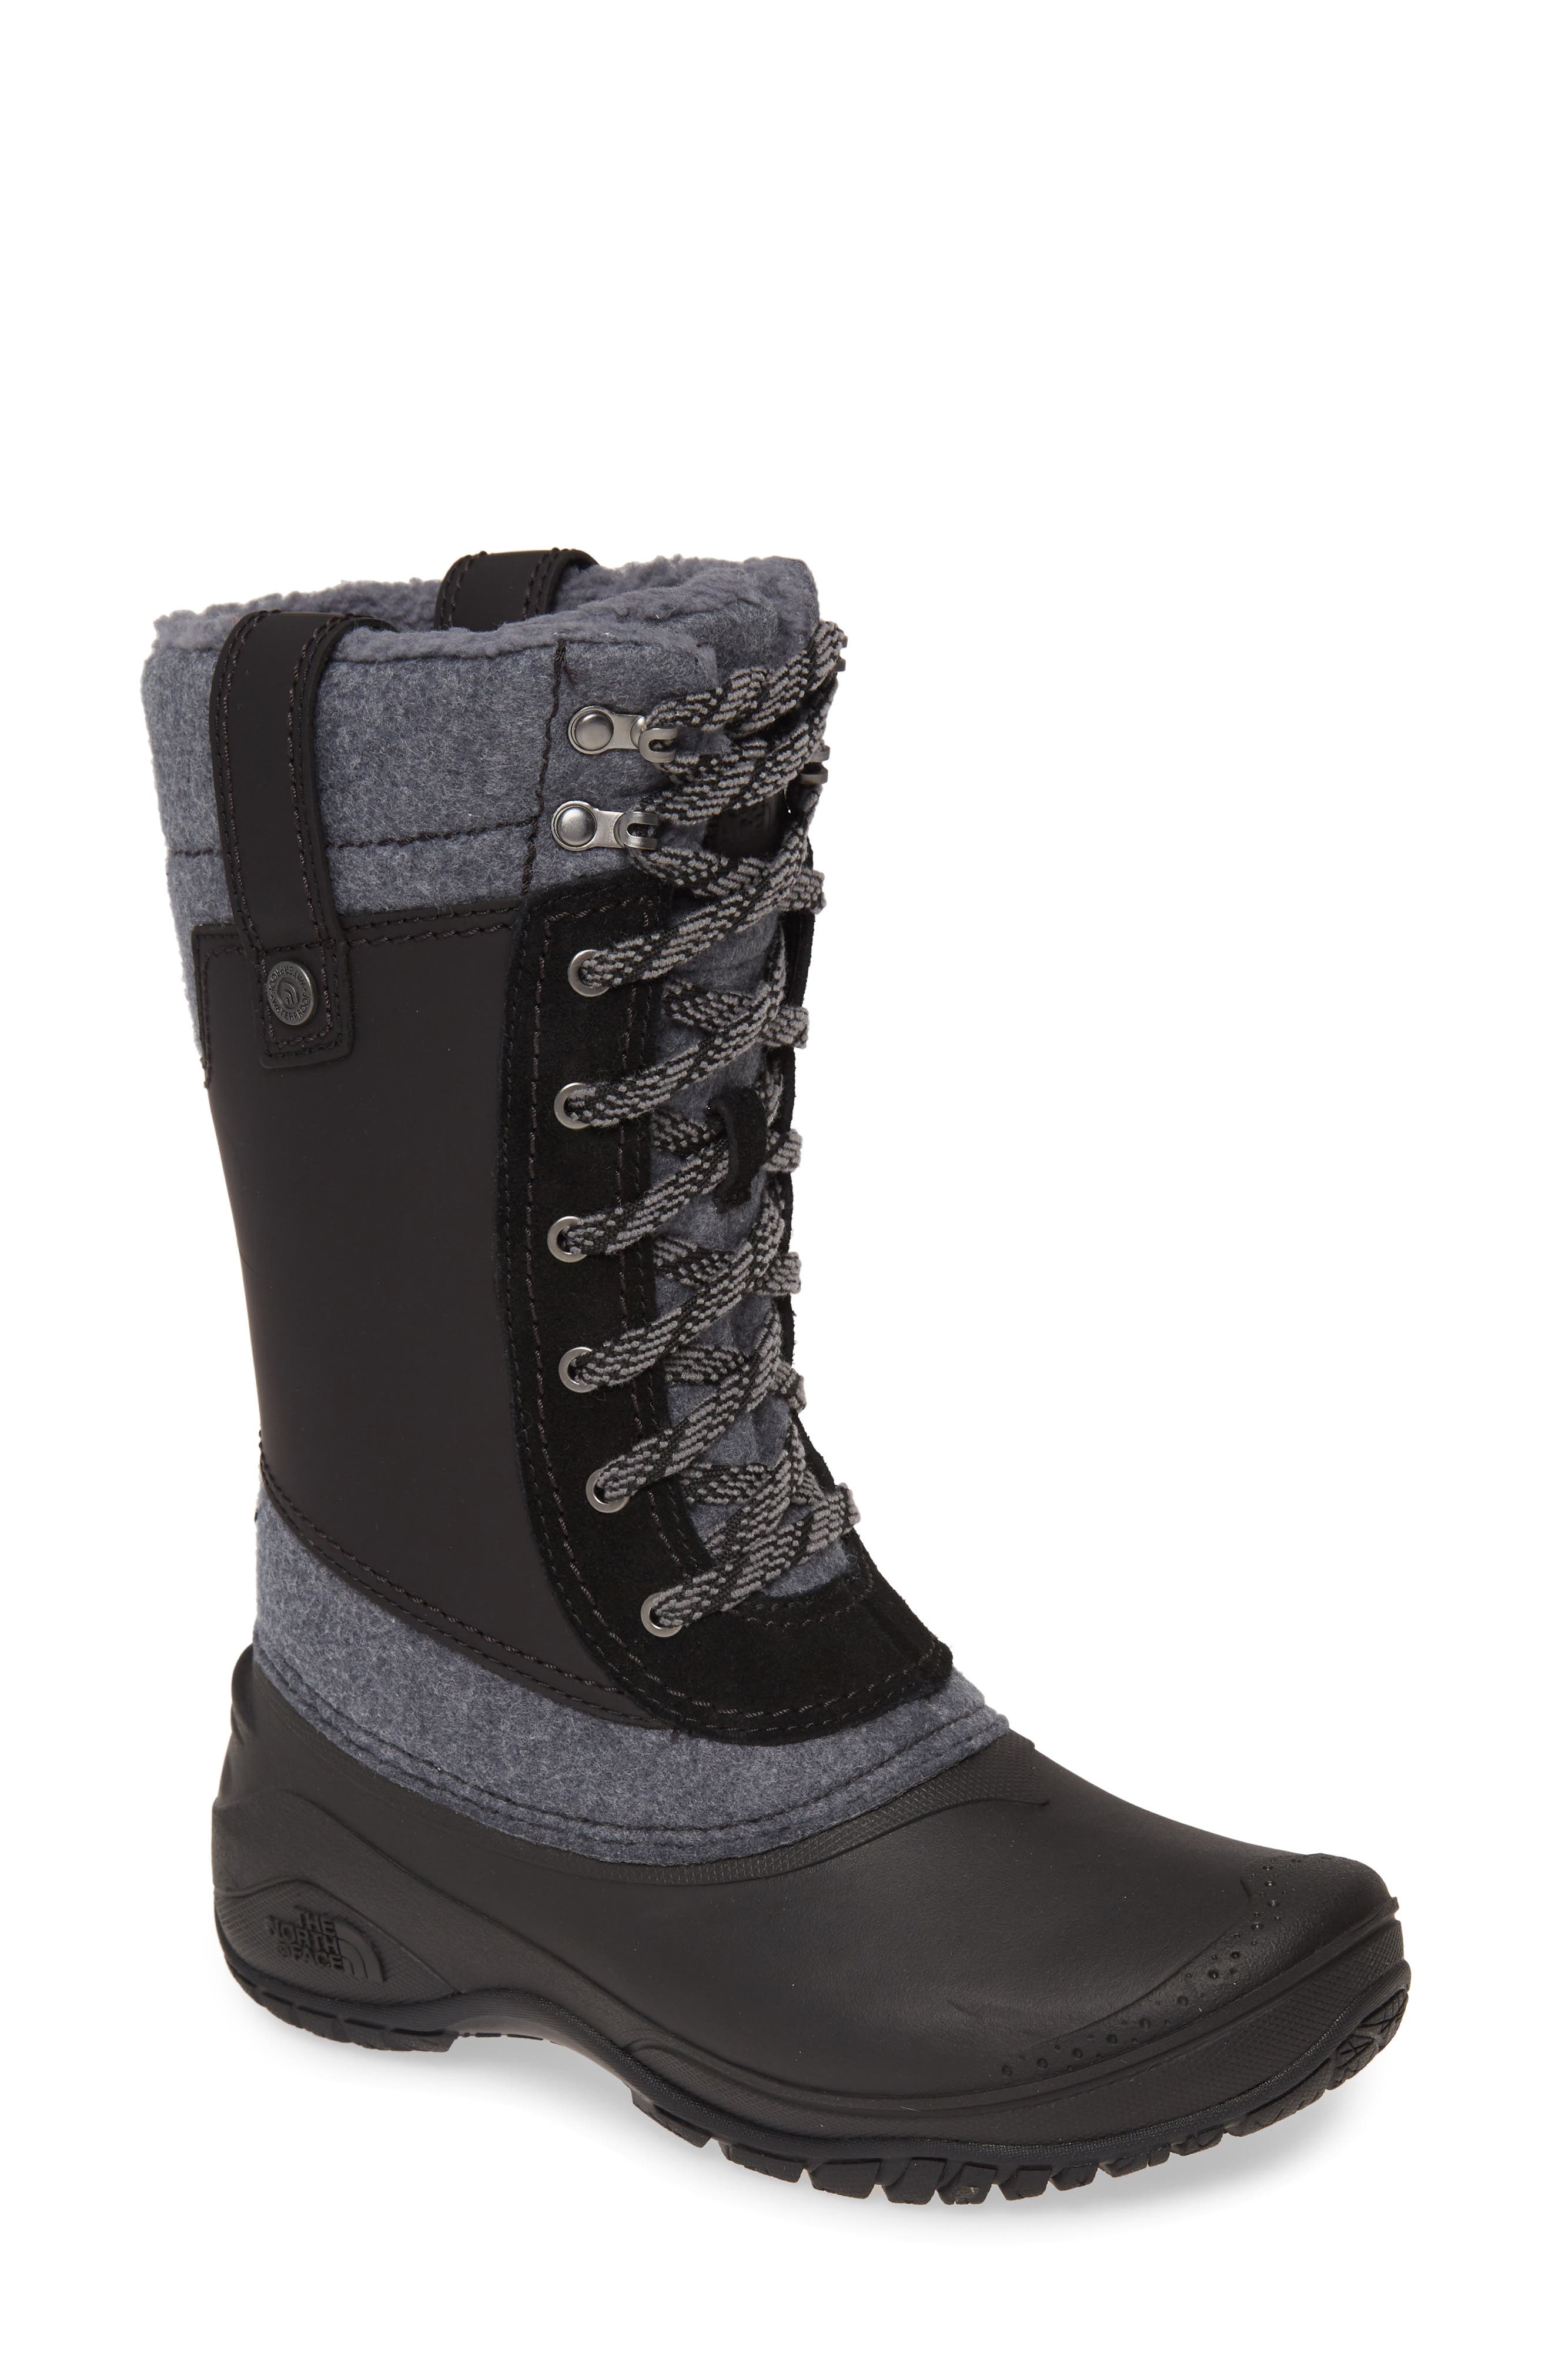 north face female boots